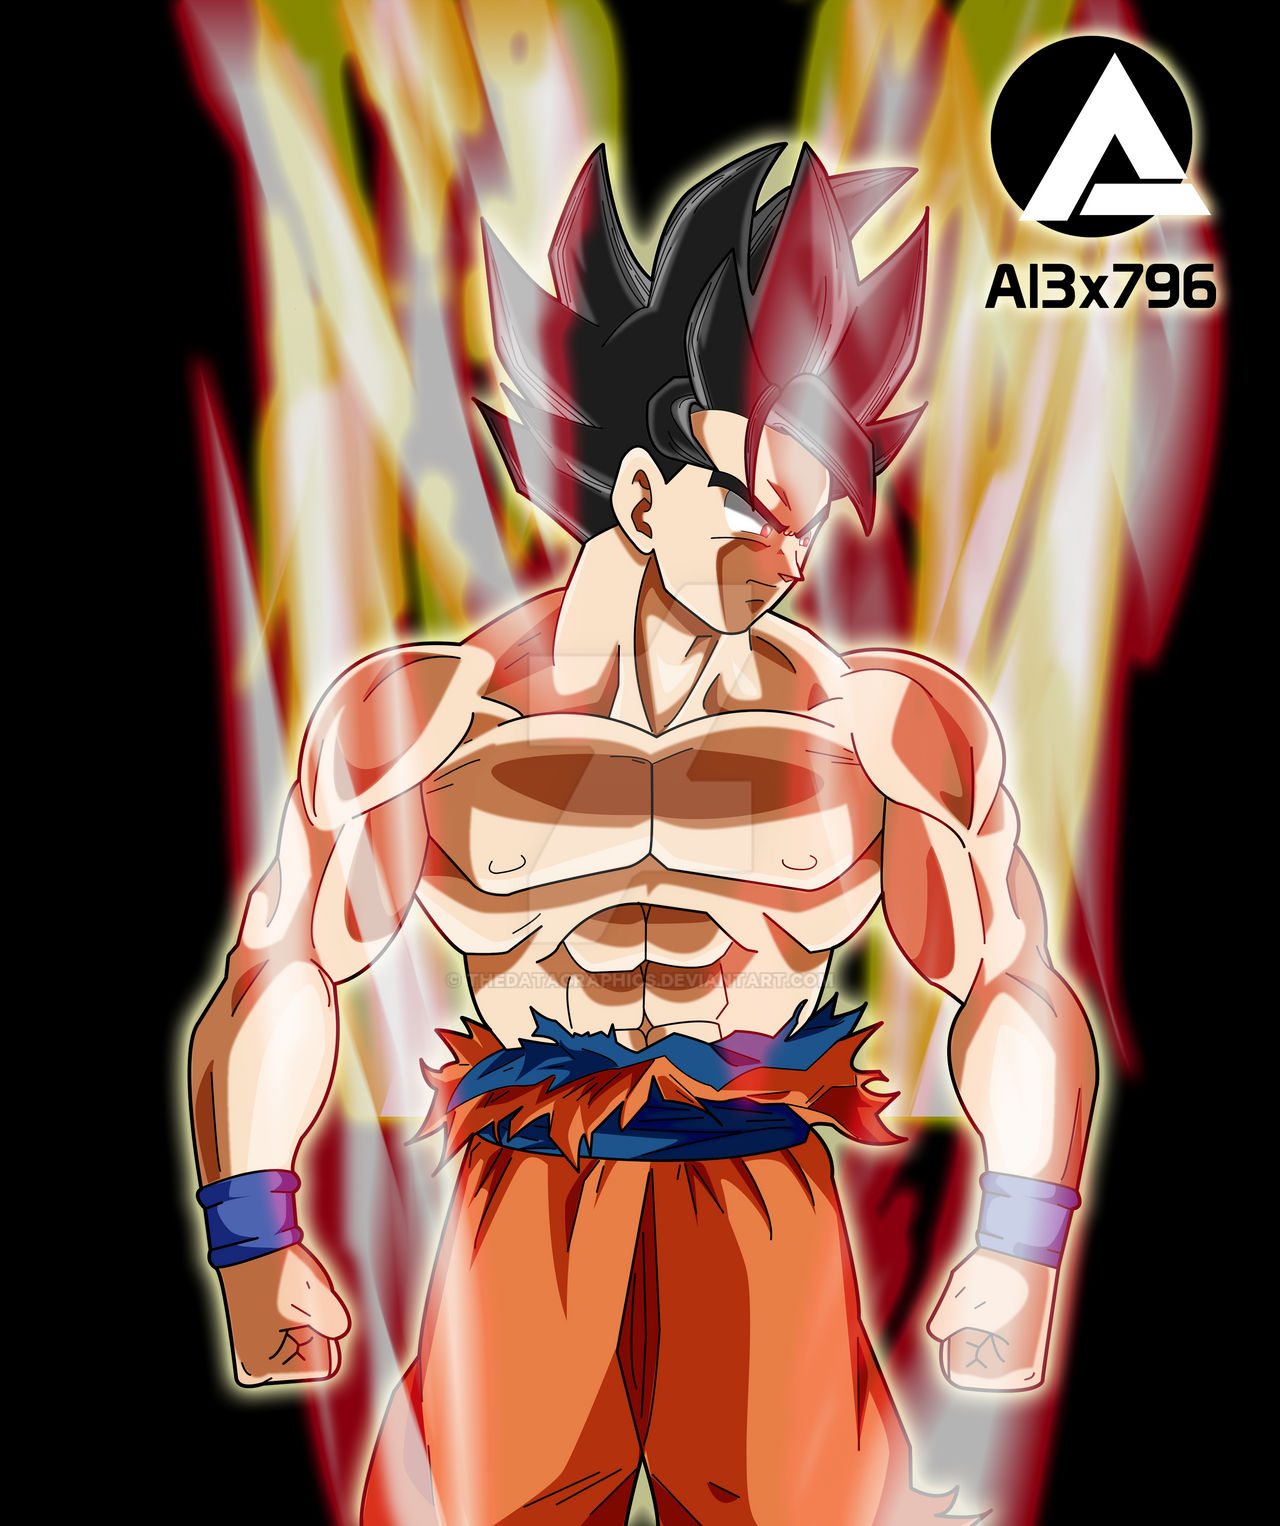 GOKU LIMIT BREAKER FORM IN FRONT by THEDATAGRAPHICS on DeviantArt